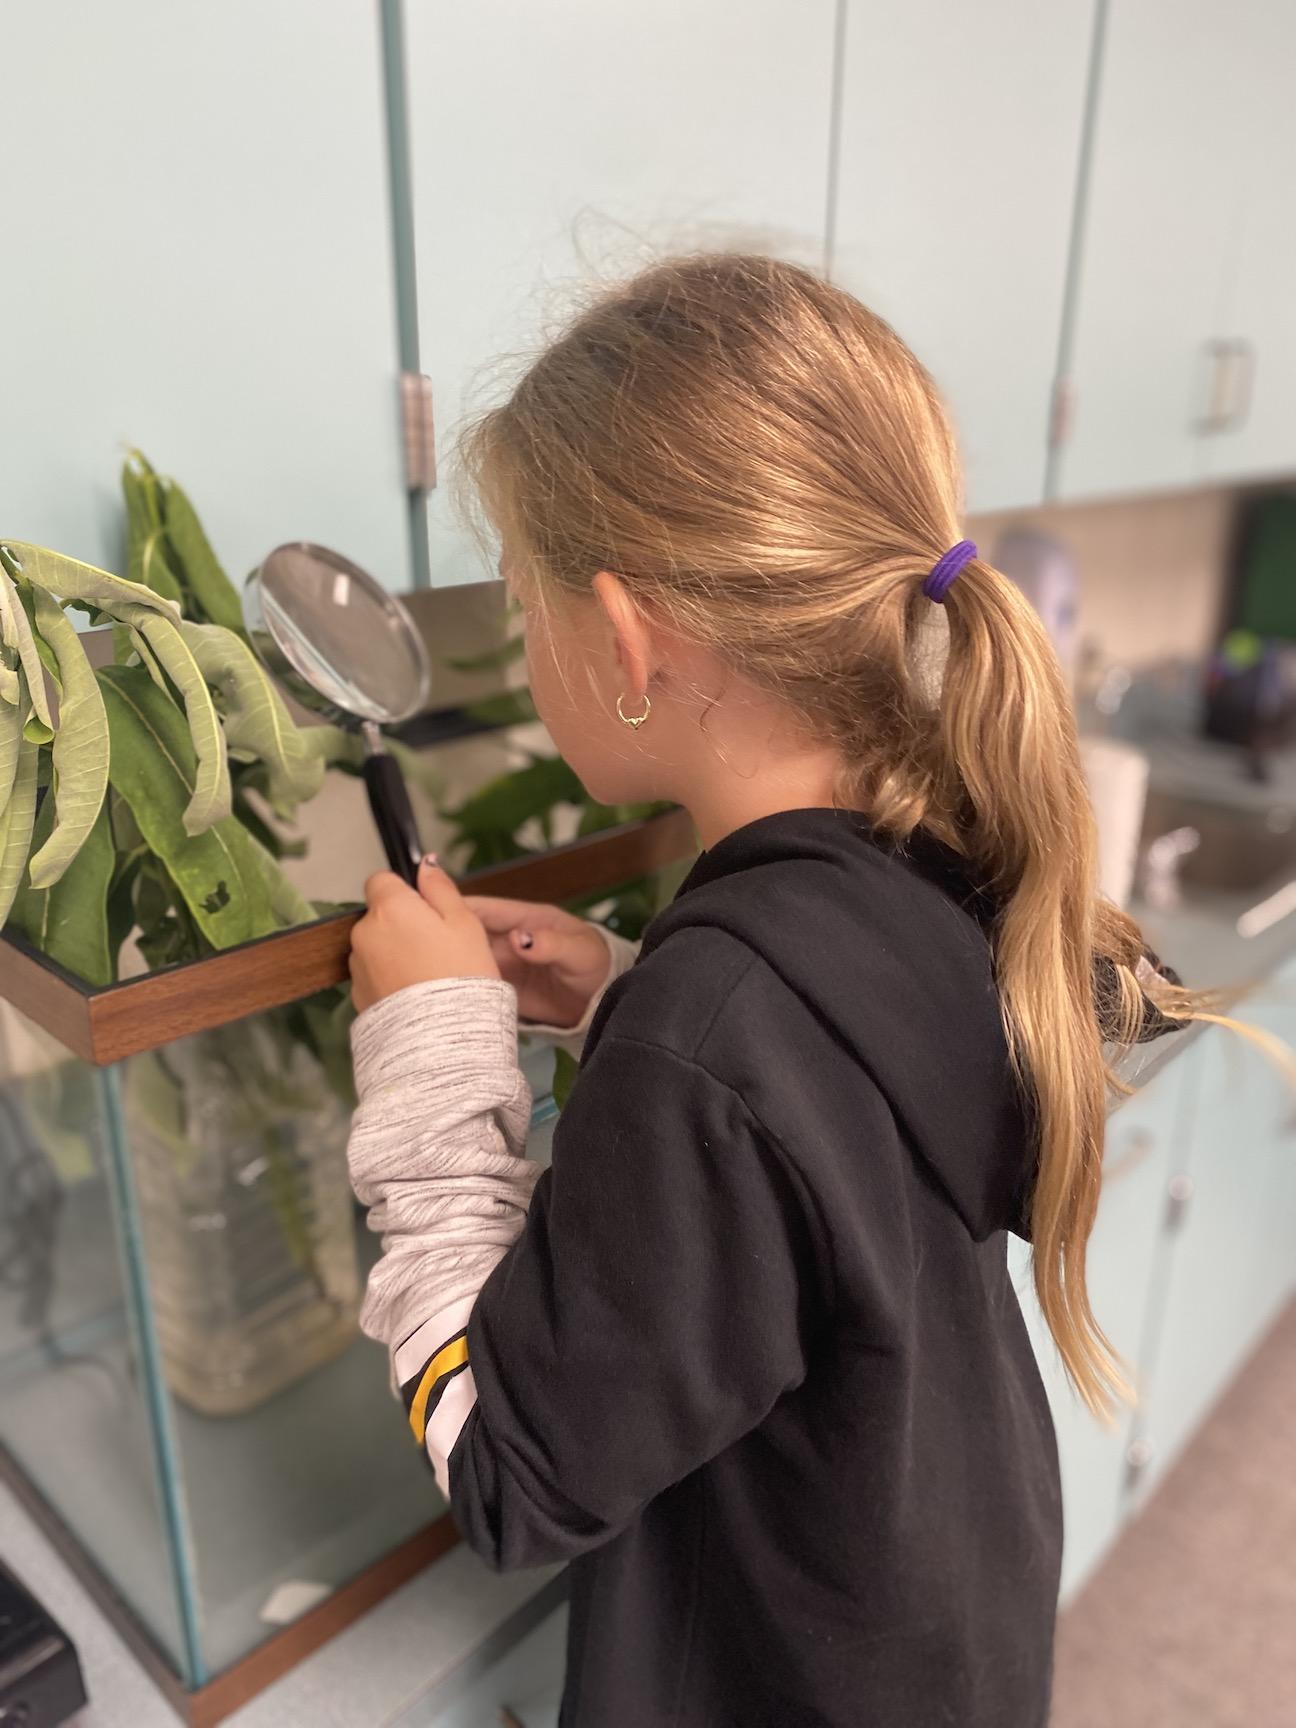 Summer Wohlmacher looks for eggs on a milkweed plant